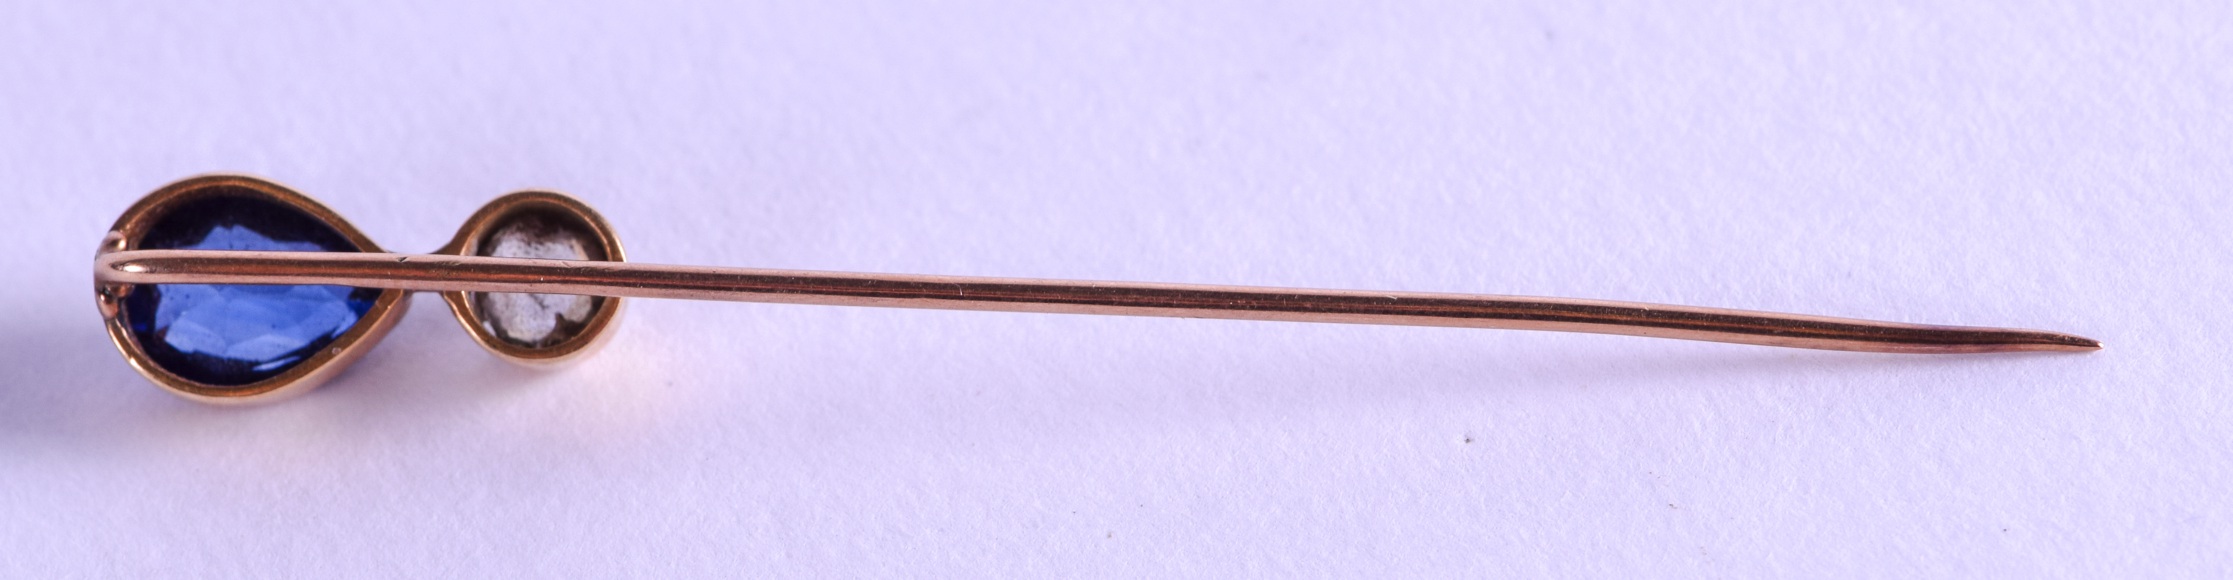 A VICTORIAN GOLD AND SAPPHIRE TIE PIN. 6.75 cm long. - Image 3 of 3